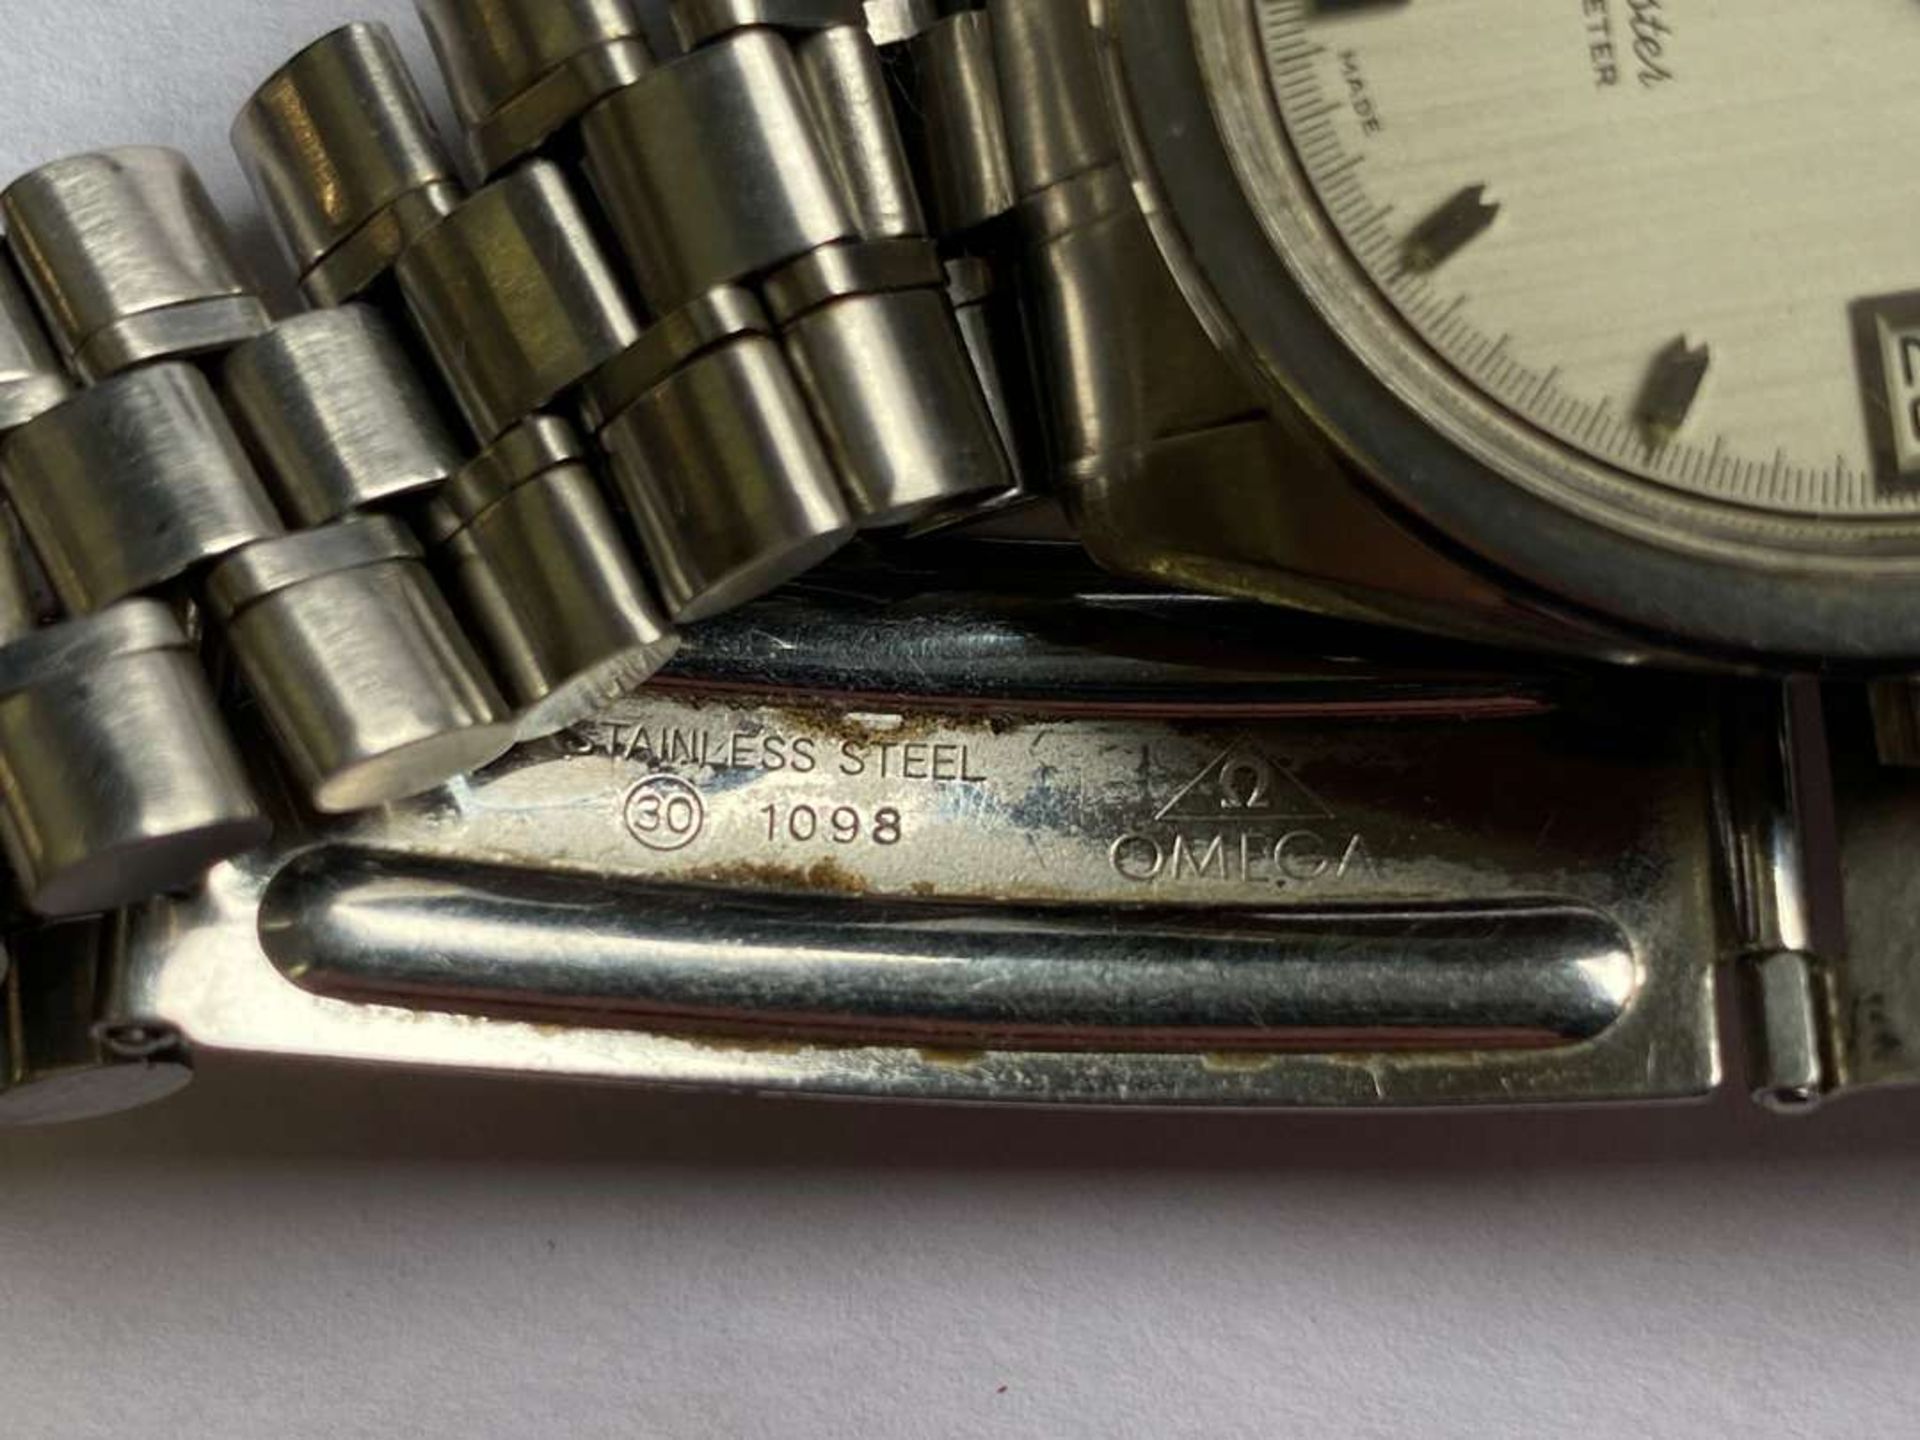 OMEGA. 1970's Seamaster, Chronometer, Electronic f300 Hz, stainless steel calendar wristwatch. - Image 6 of 6